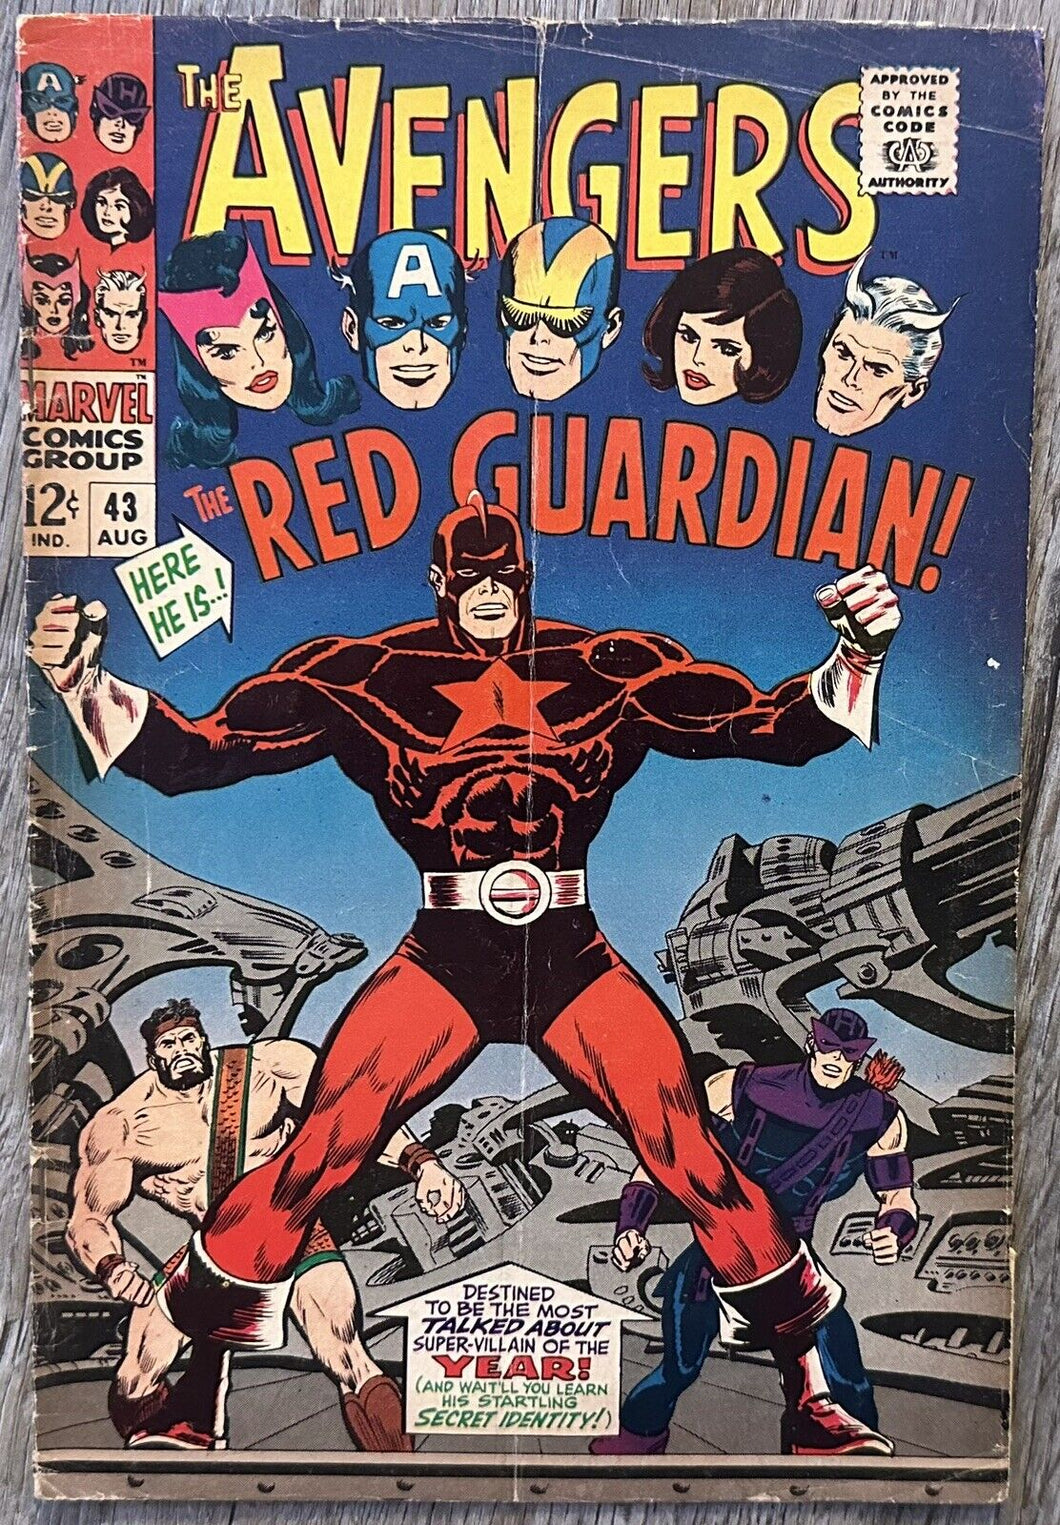 AVENGERS #43 (MARVEL,1967) 1ST RED GUARDIAN APPEARANCE